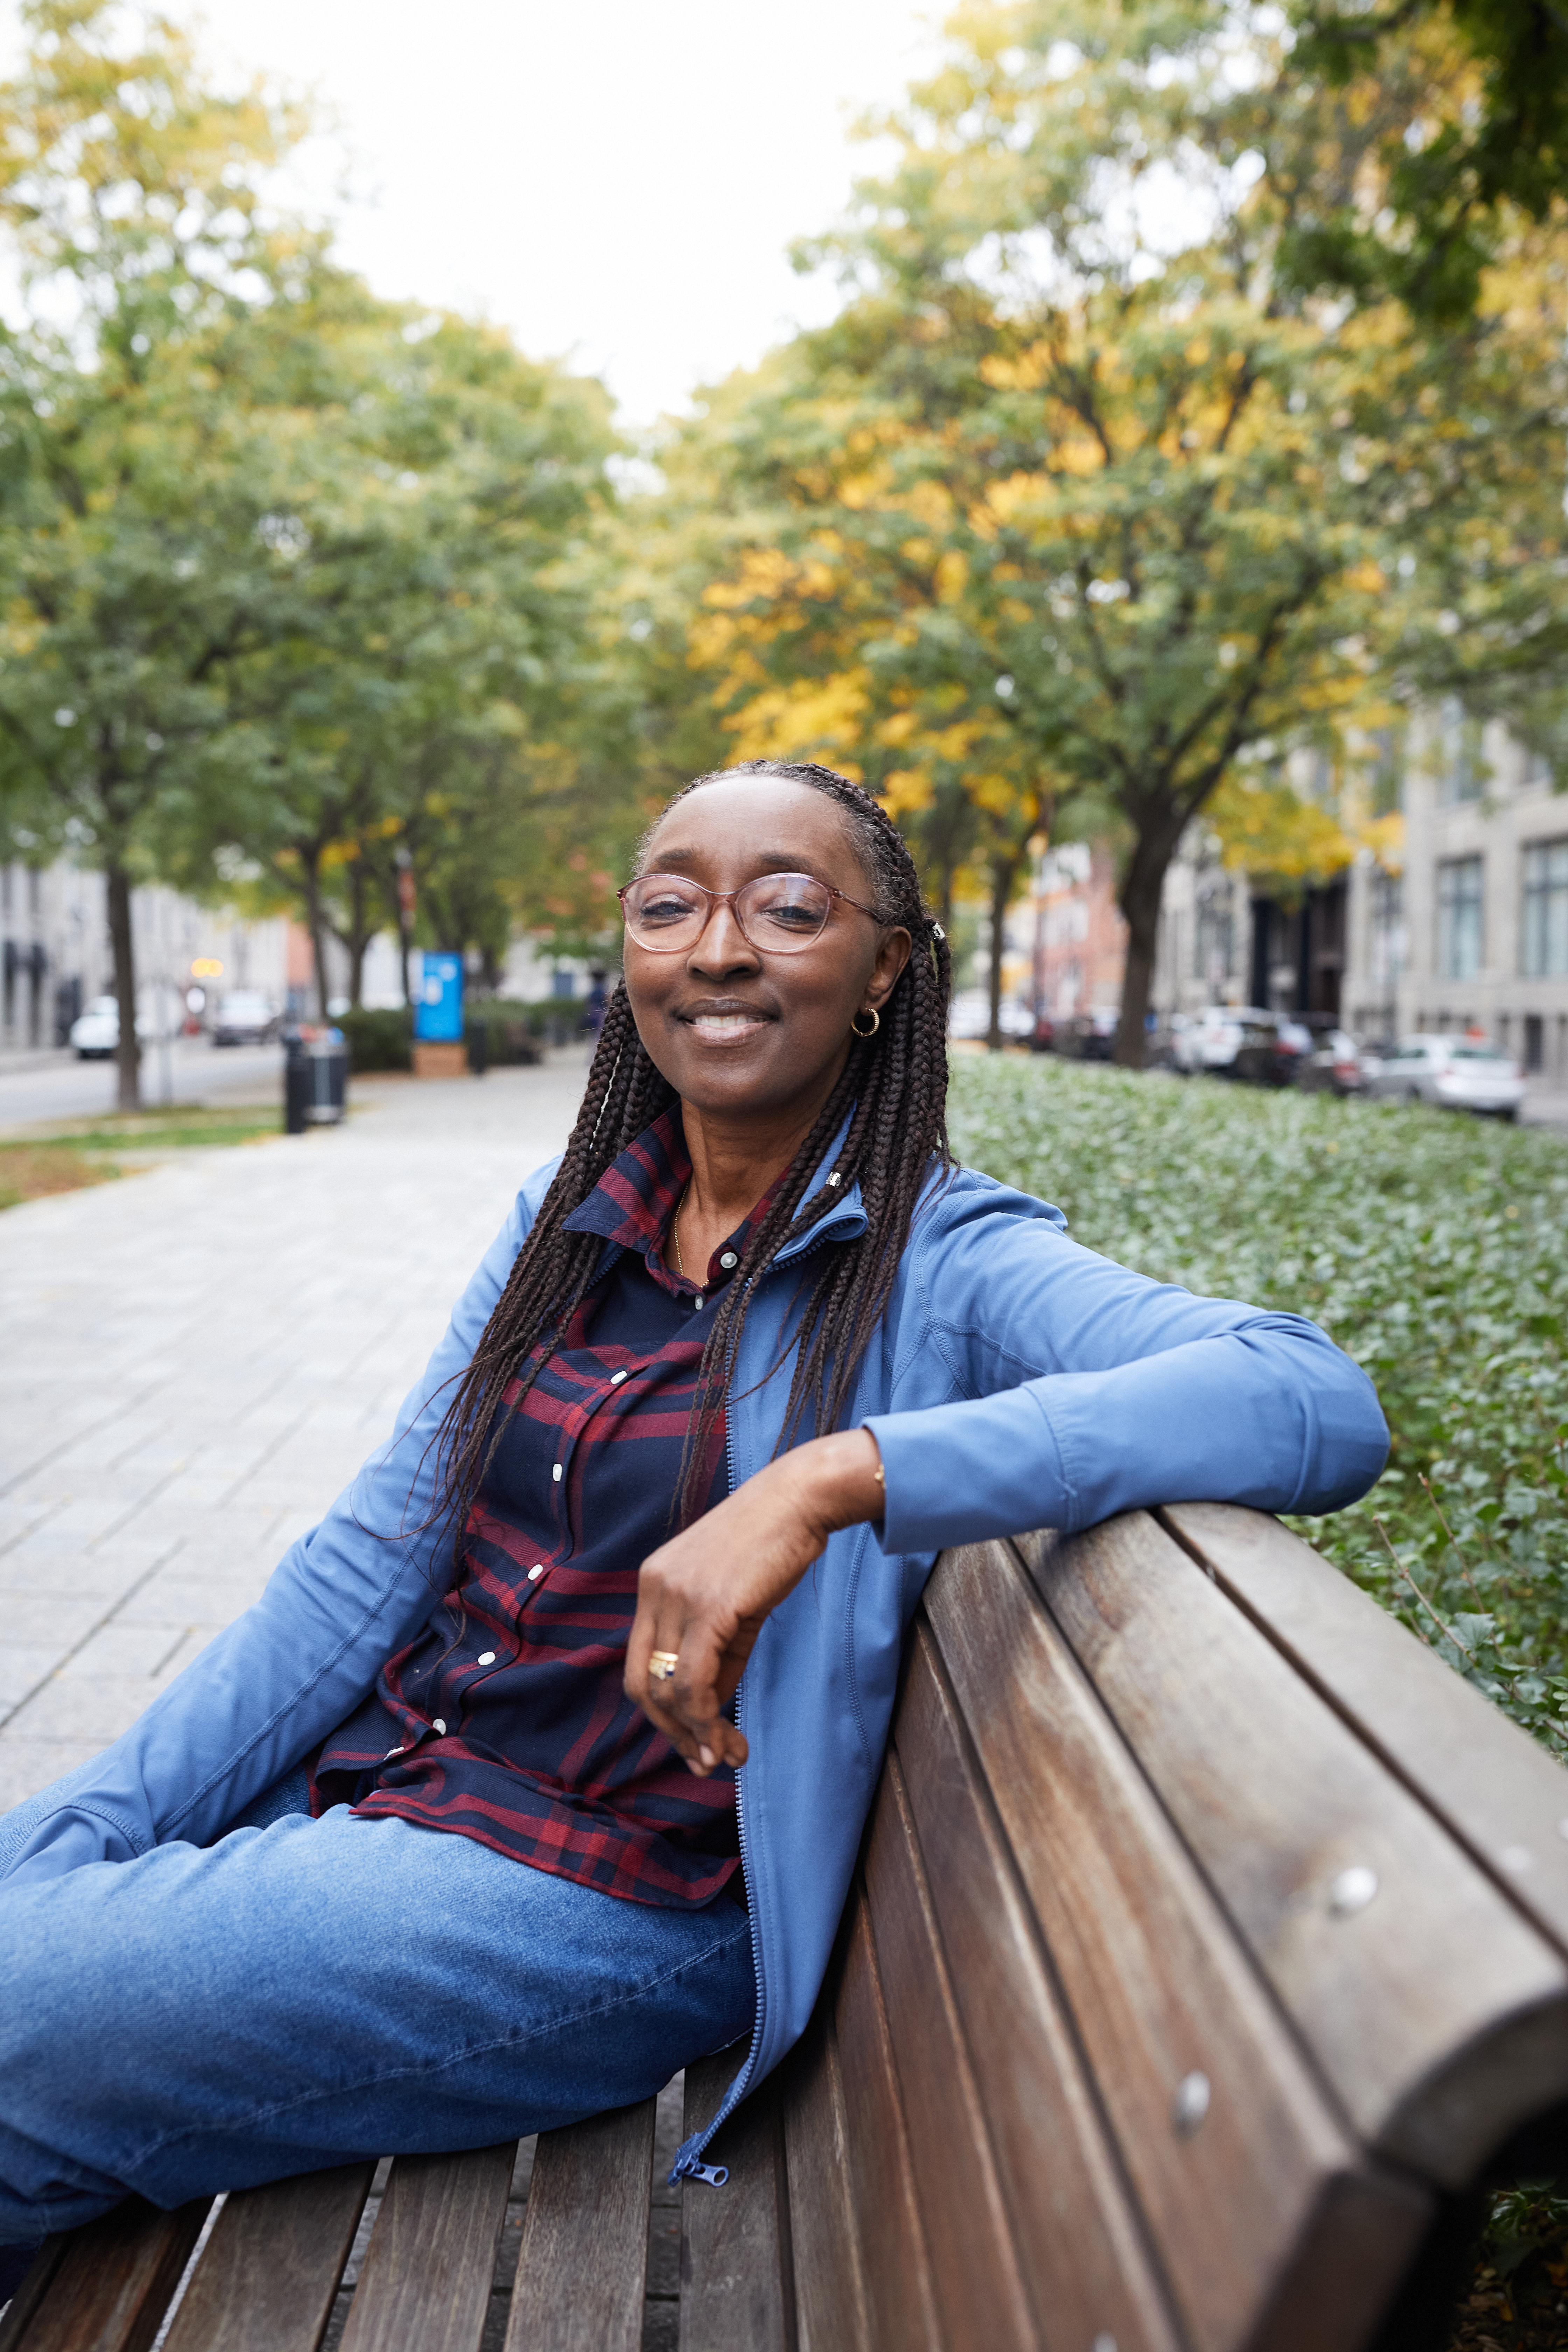 Binta is sitting on an outdoor wooden bench. She is smiling and wearing glasses.